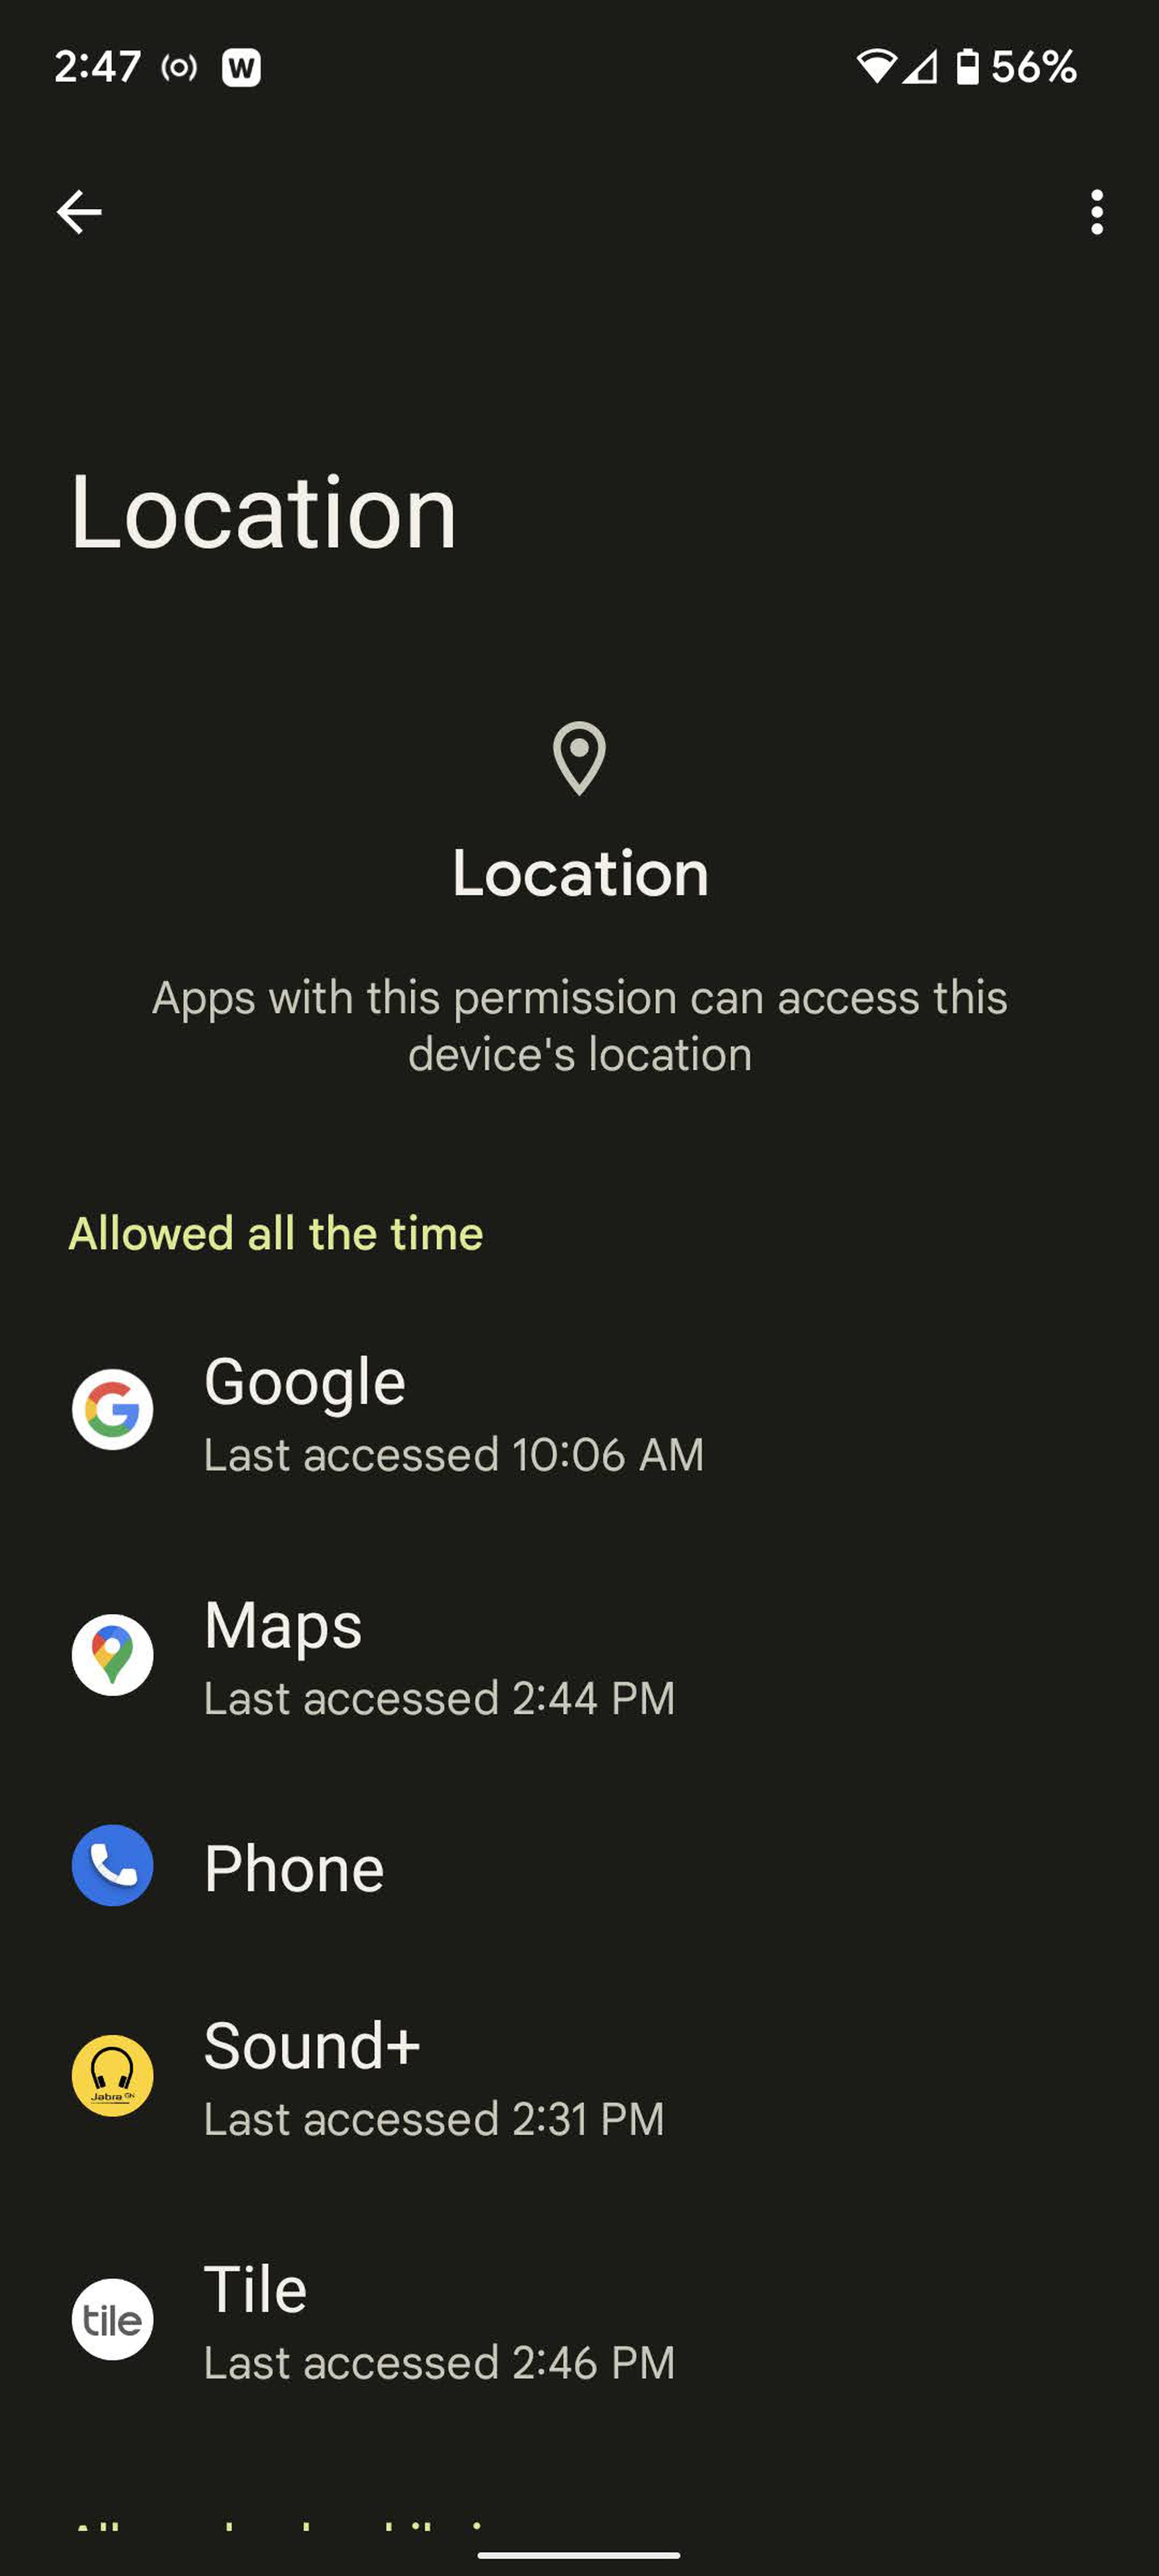 Once Location is enabled, you can tweak the settings of your various apps.